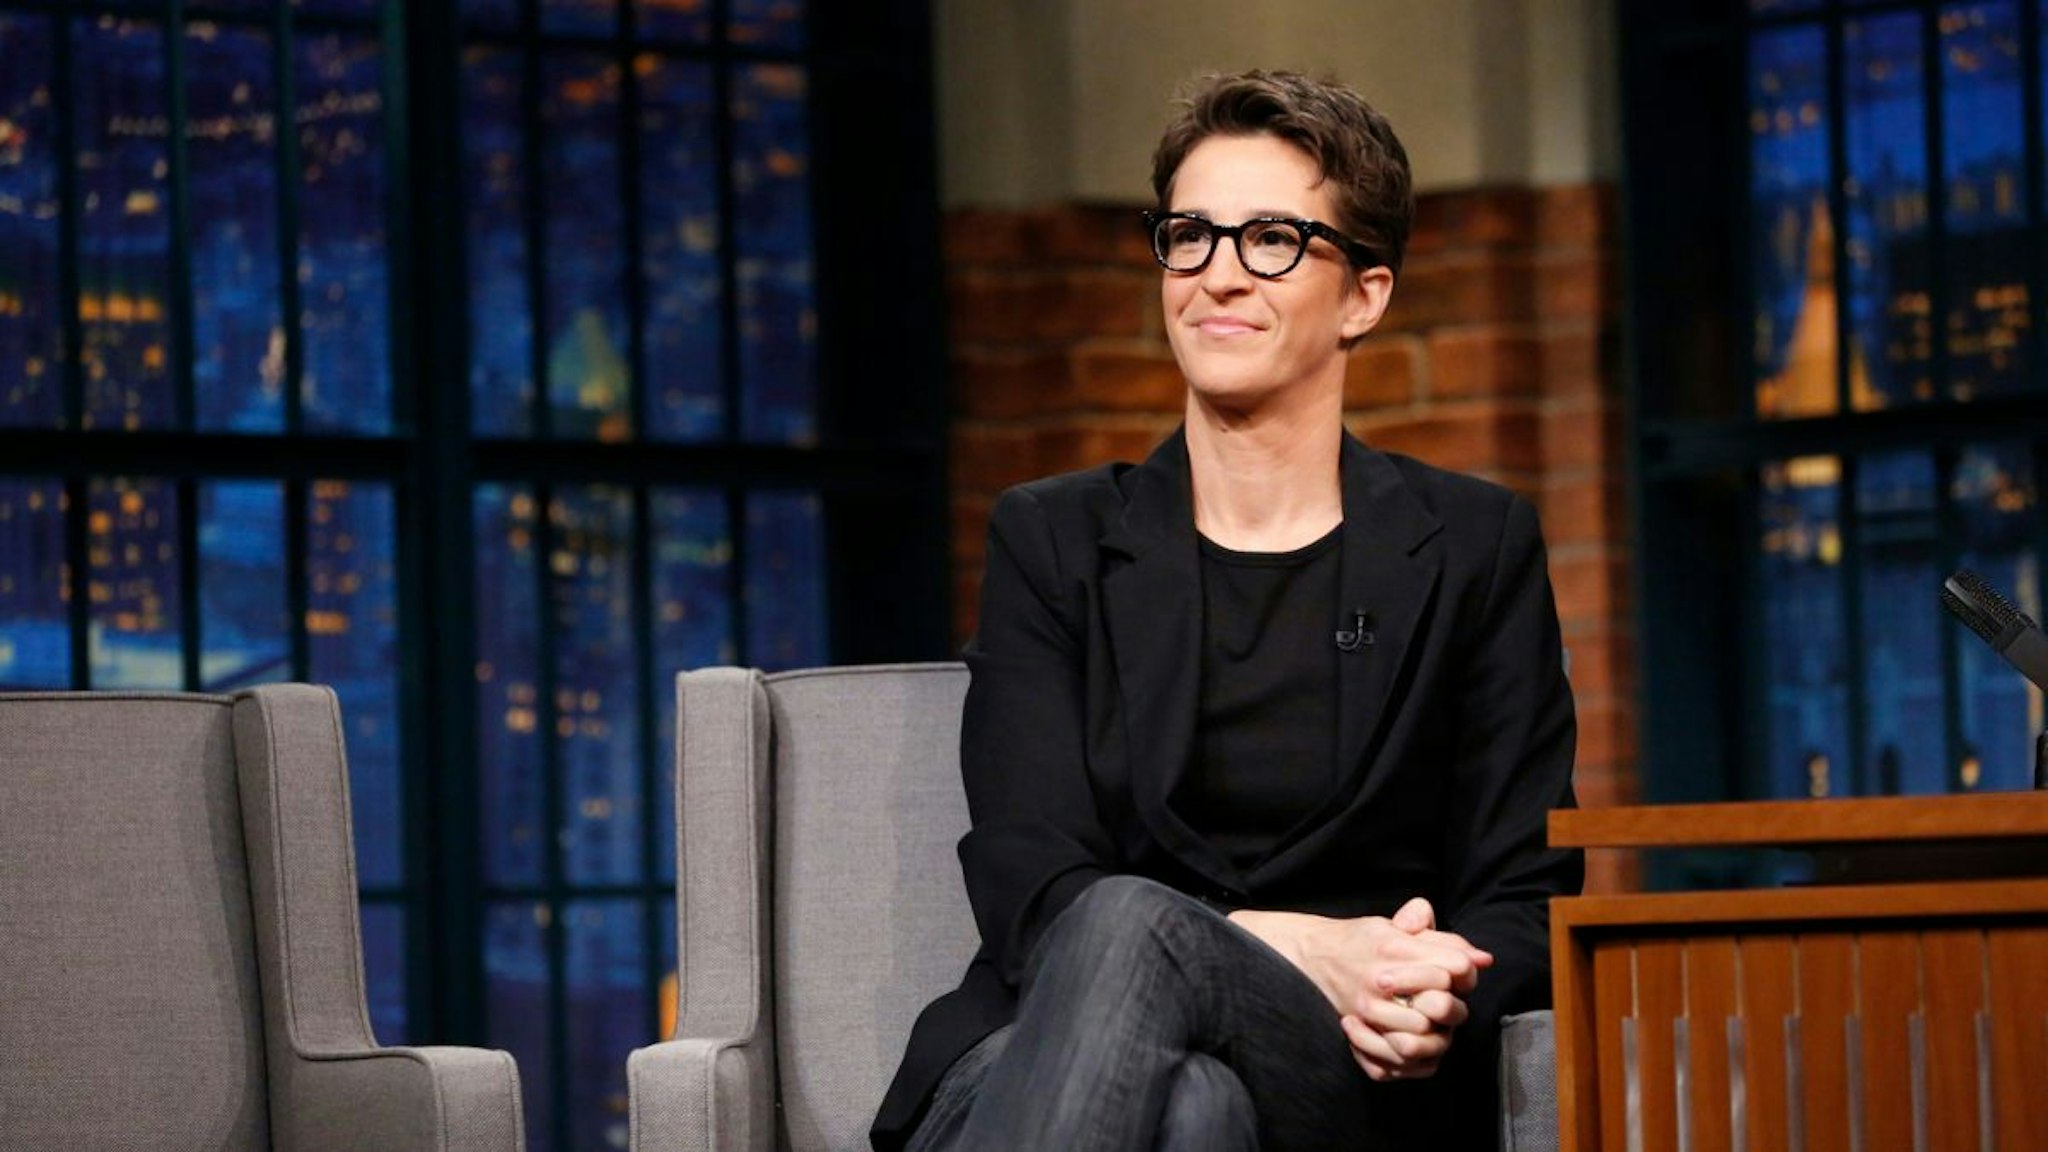 Political commentator, Rachel Maddow during an interview on December 21, 2016.